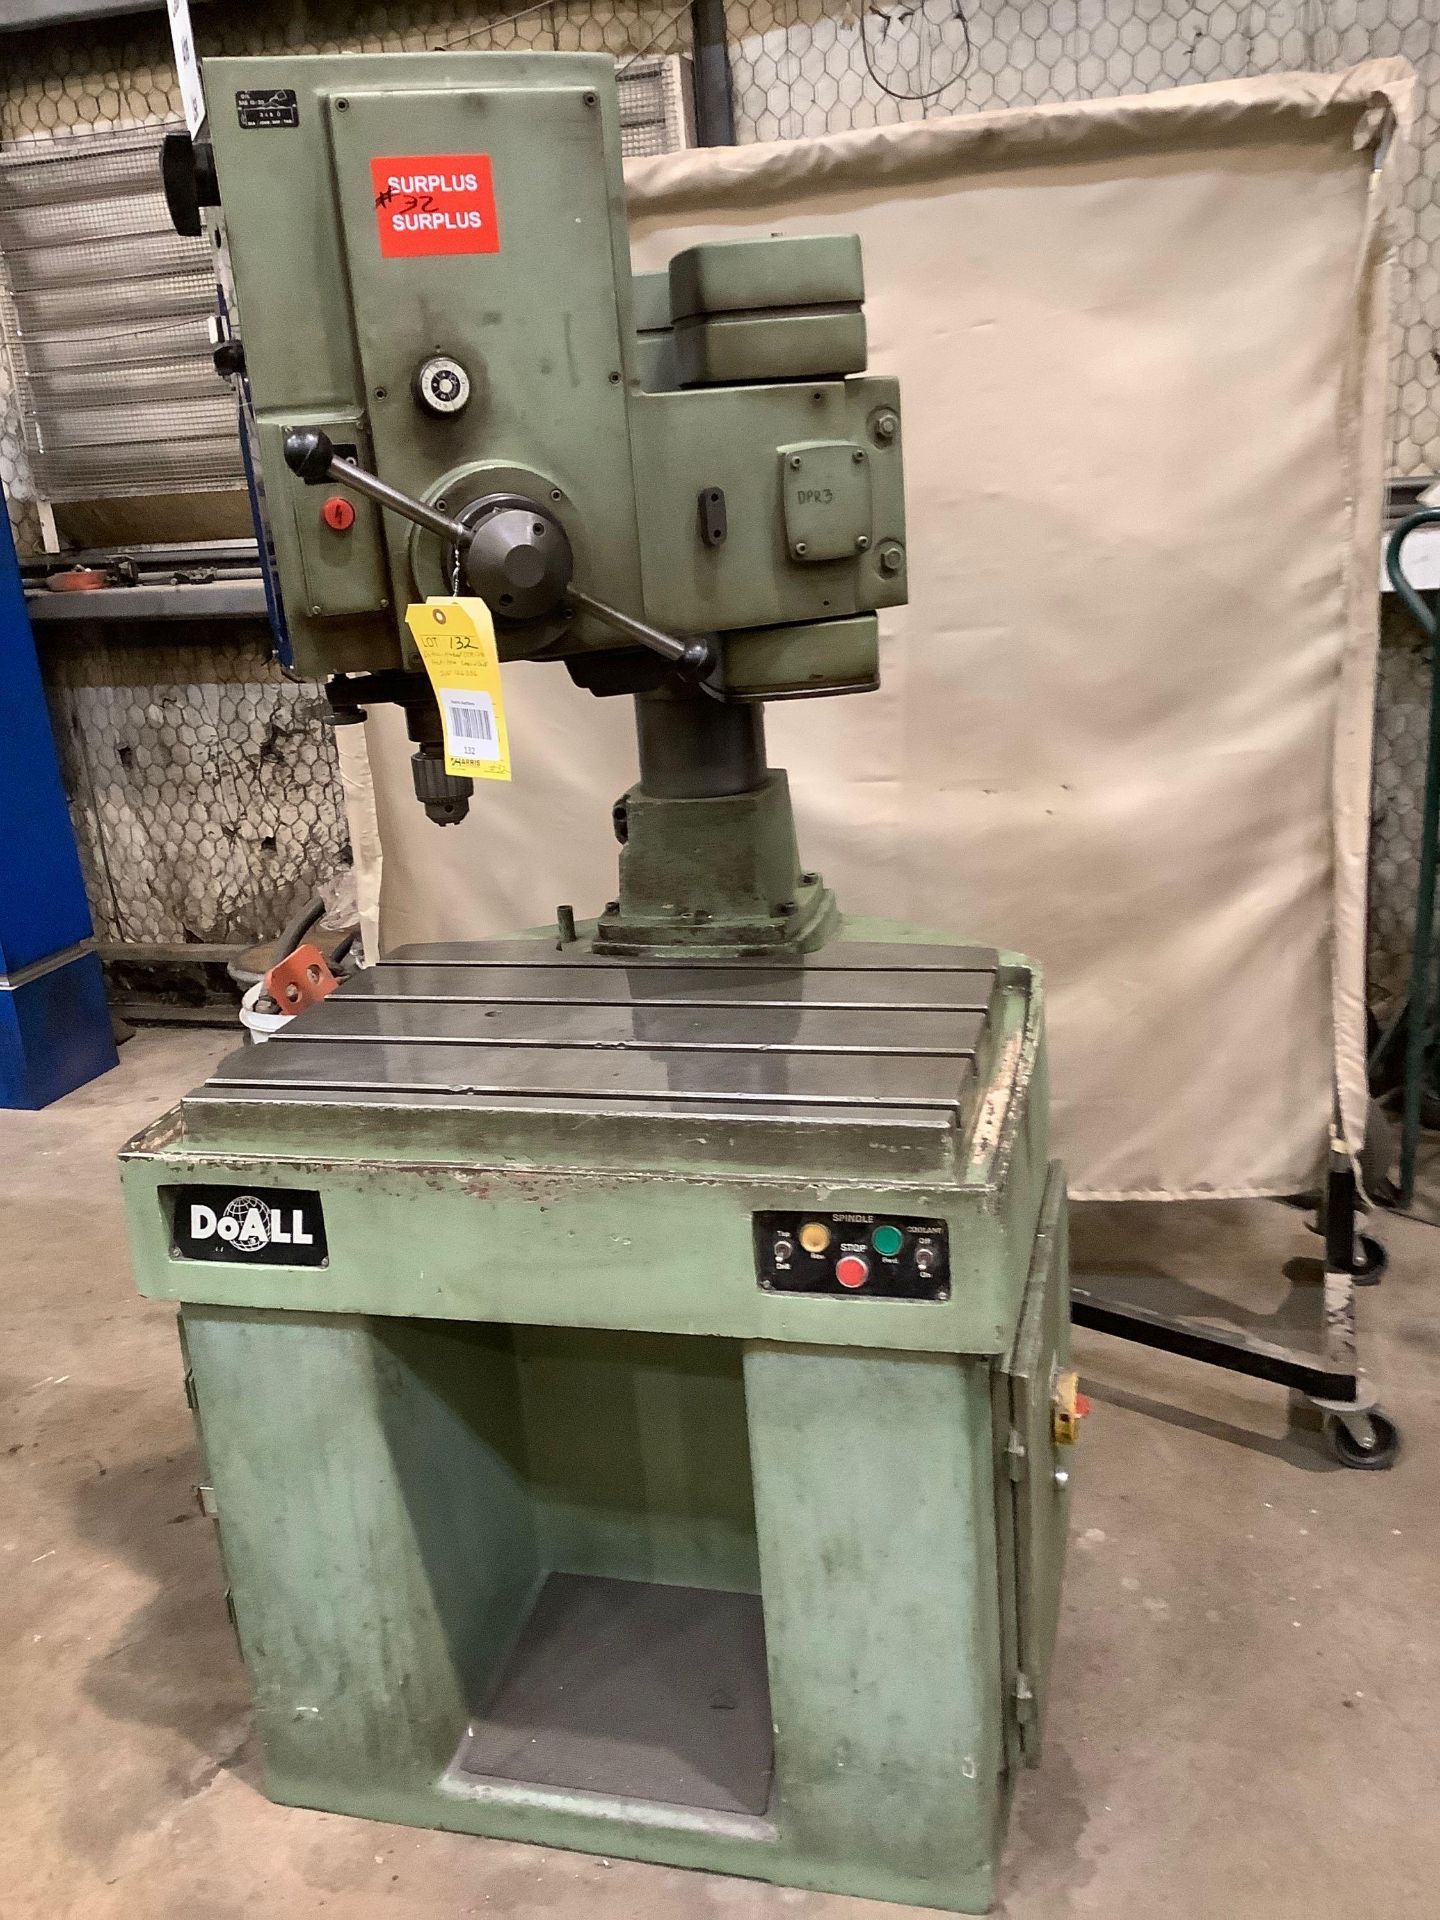 DoALL Model DTR-28 Articulating Arm Radial Drill Press - Image 2 of 7